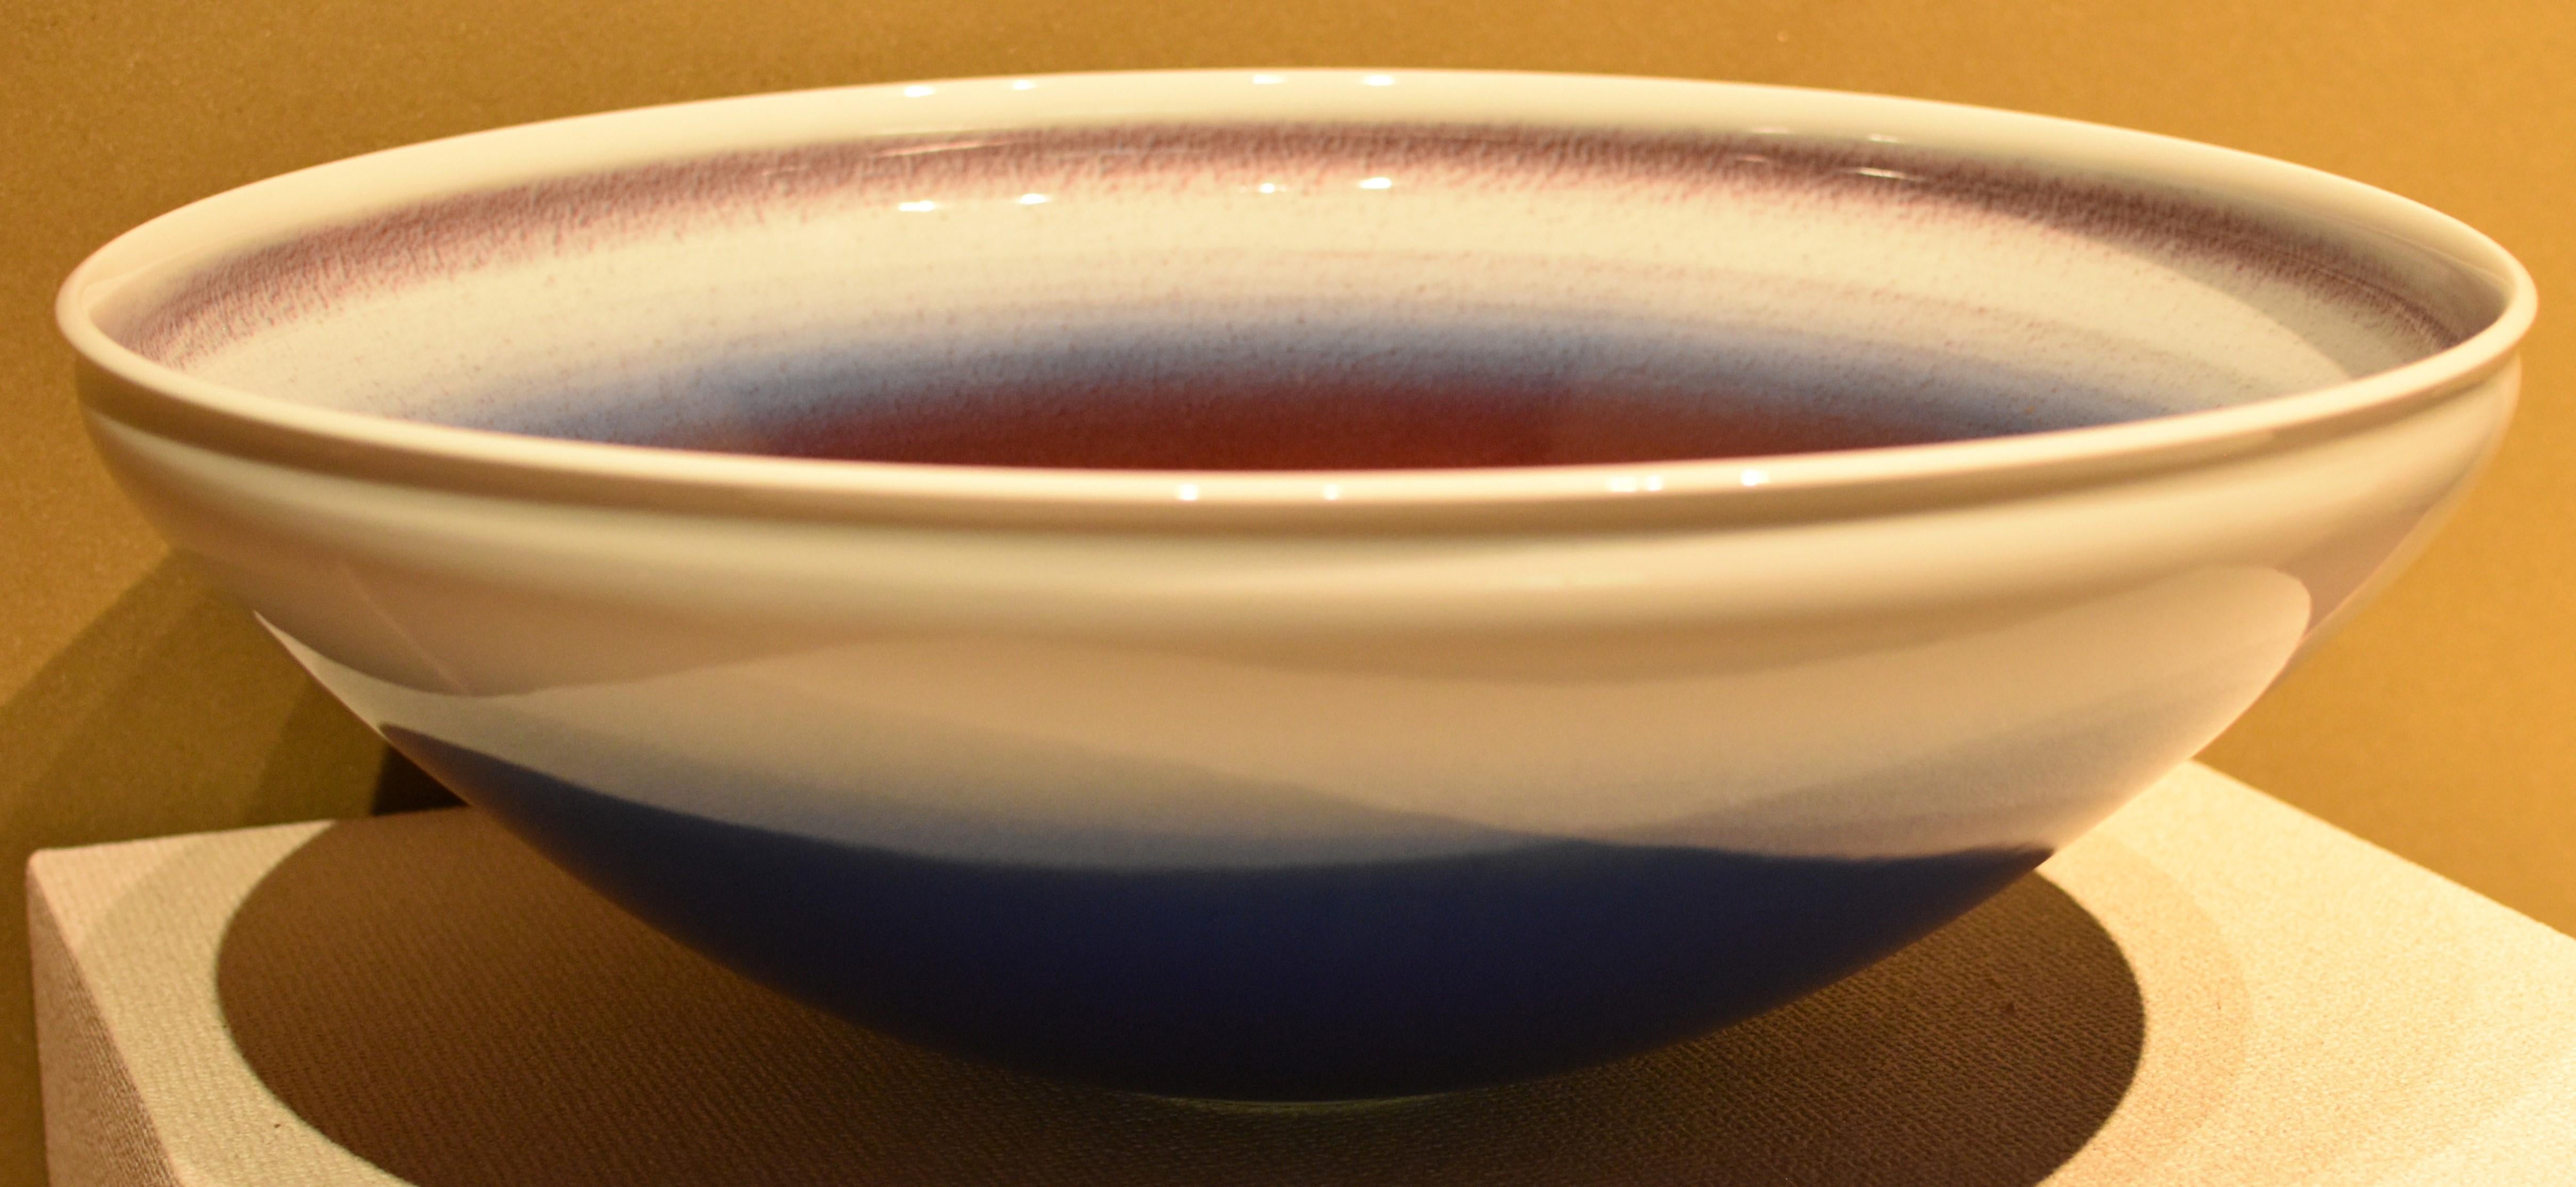 Red Blue White Hand-Glazed Porcelain Bowl by Japanese Contemporary Master Artist For Sale 1